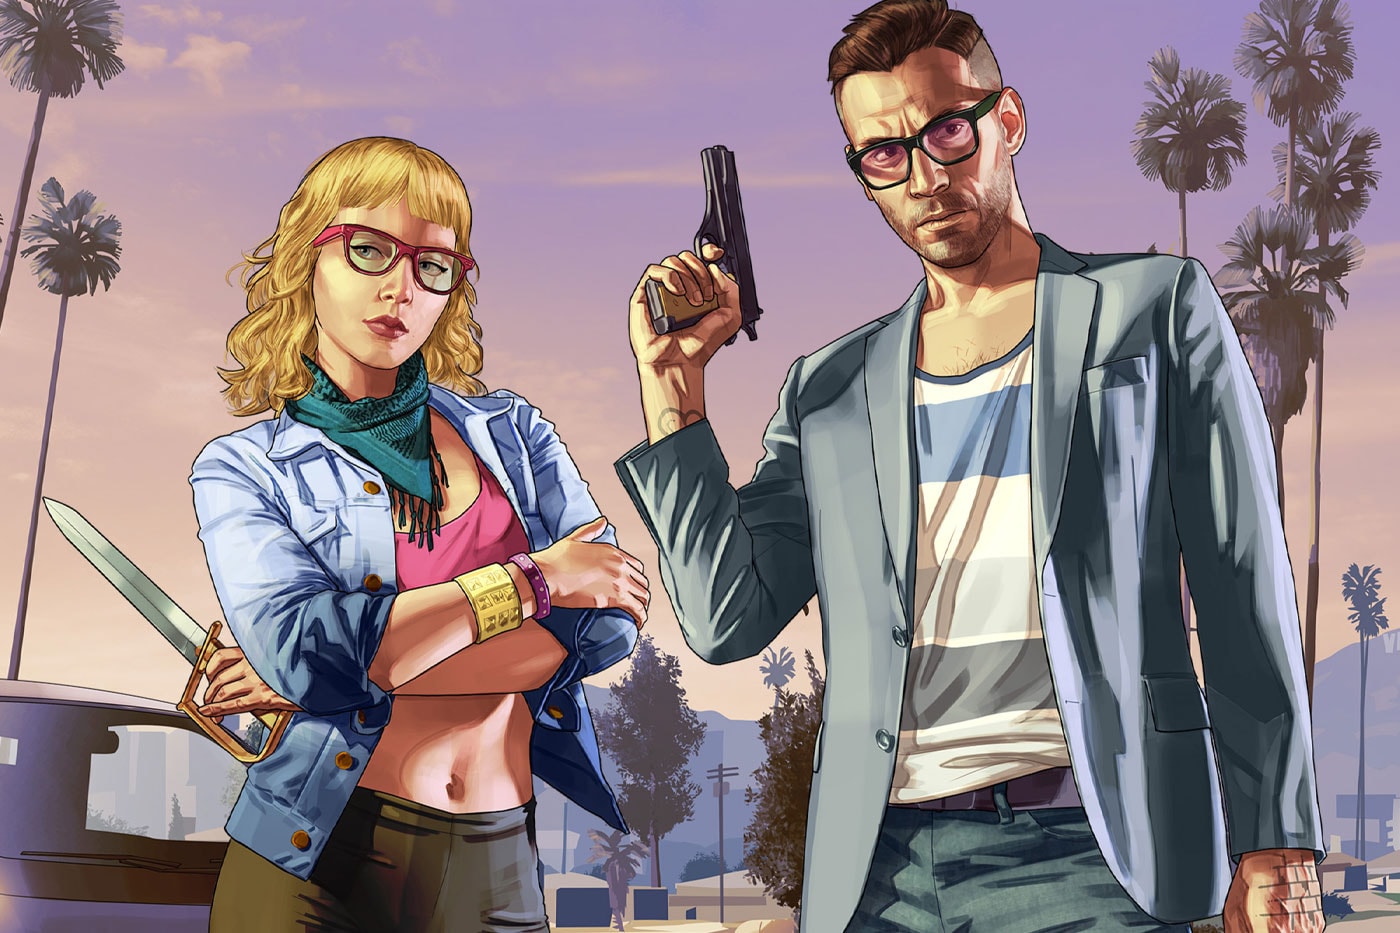 GTA 6 BETA: Release Date, Download, How To Be A Tester On Xbox One